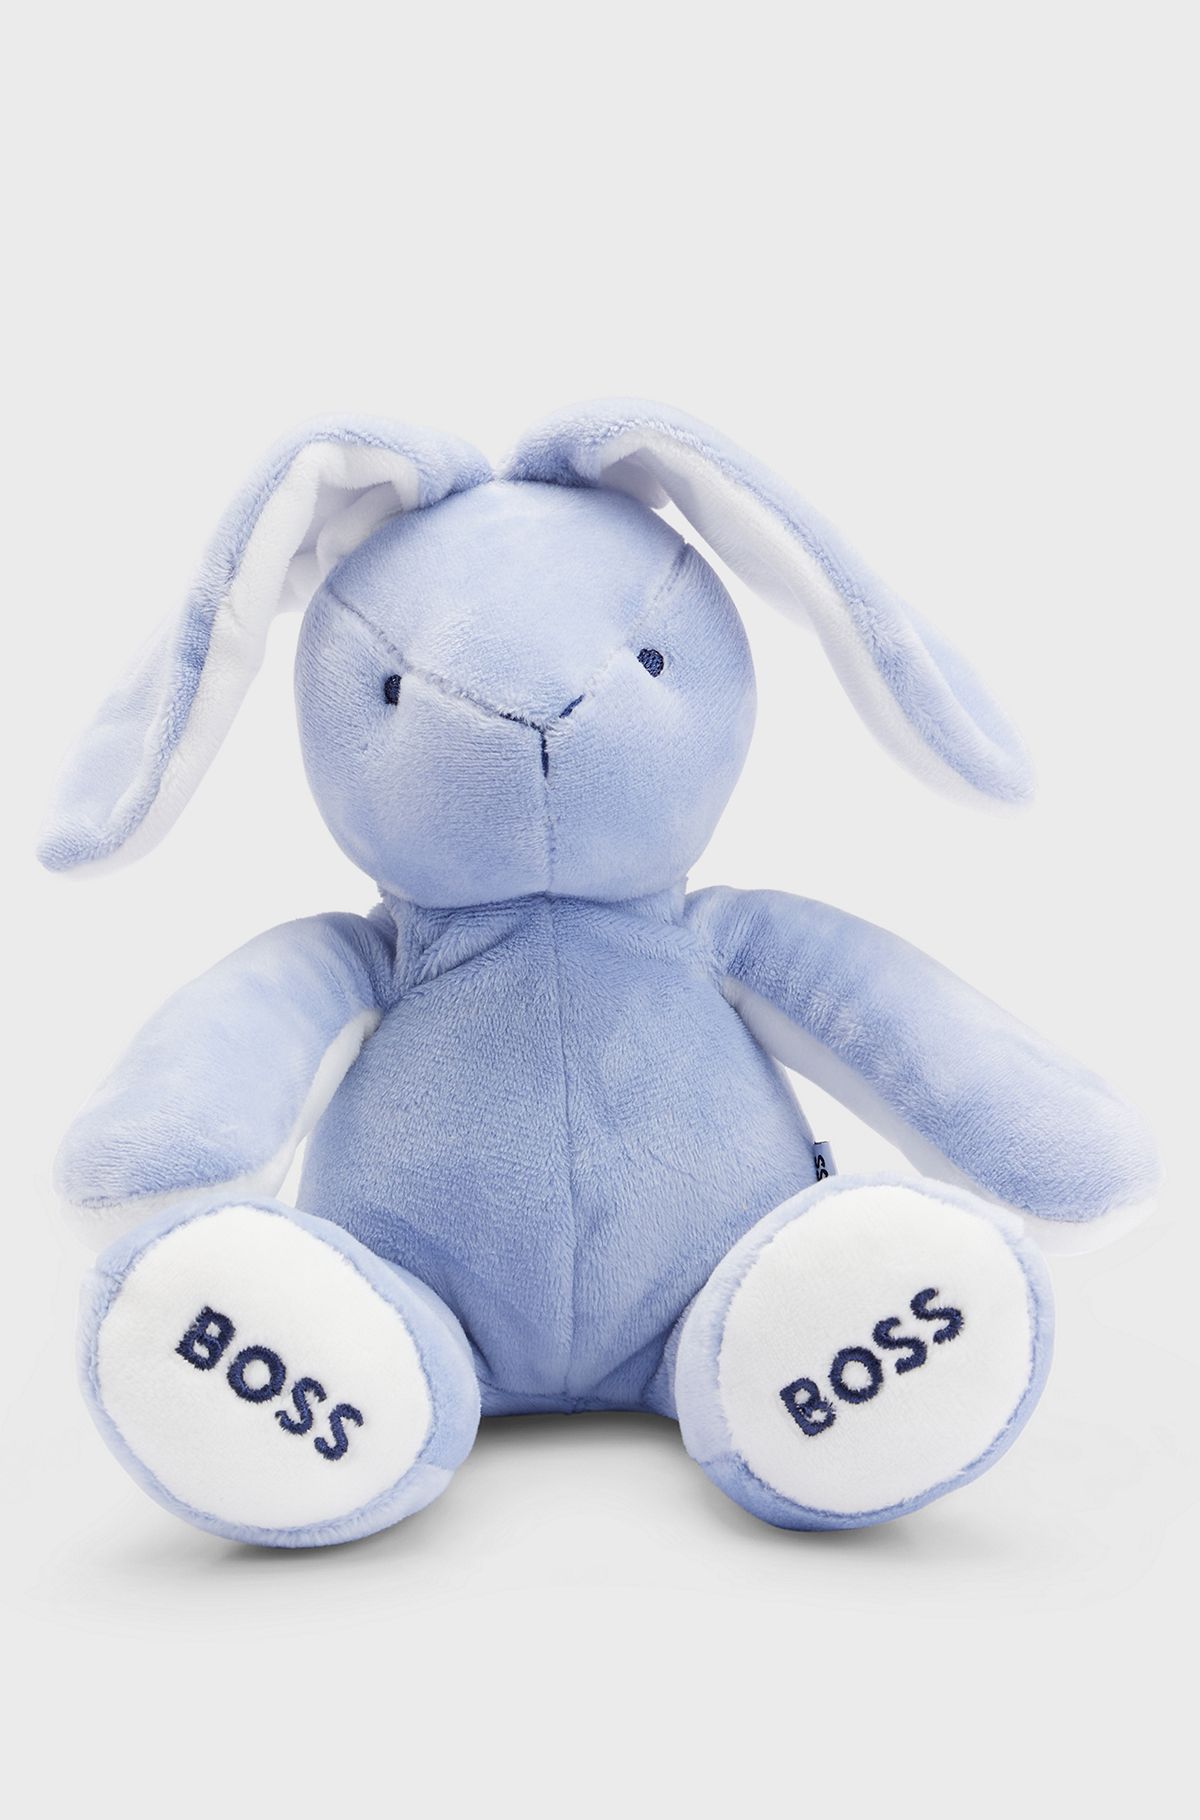 Baby faux-fur cuddly toy with embroidered logos, Light Blue